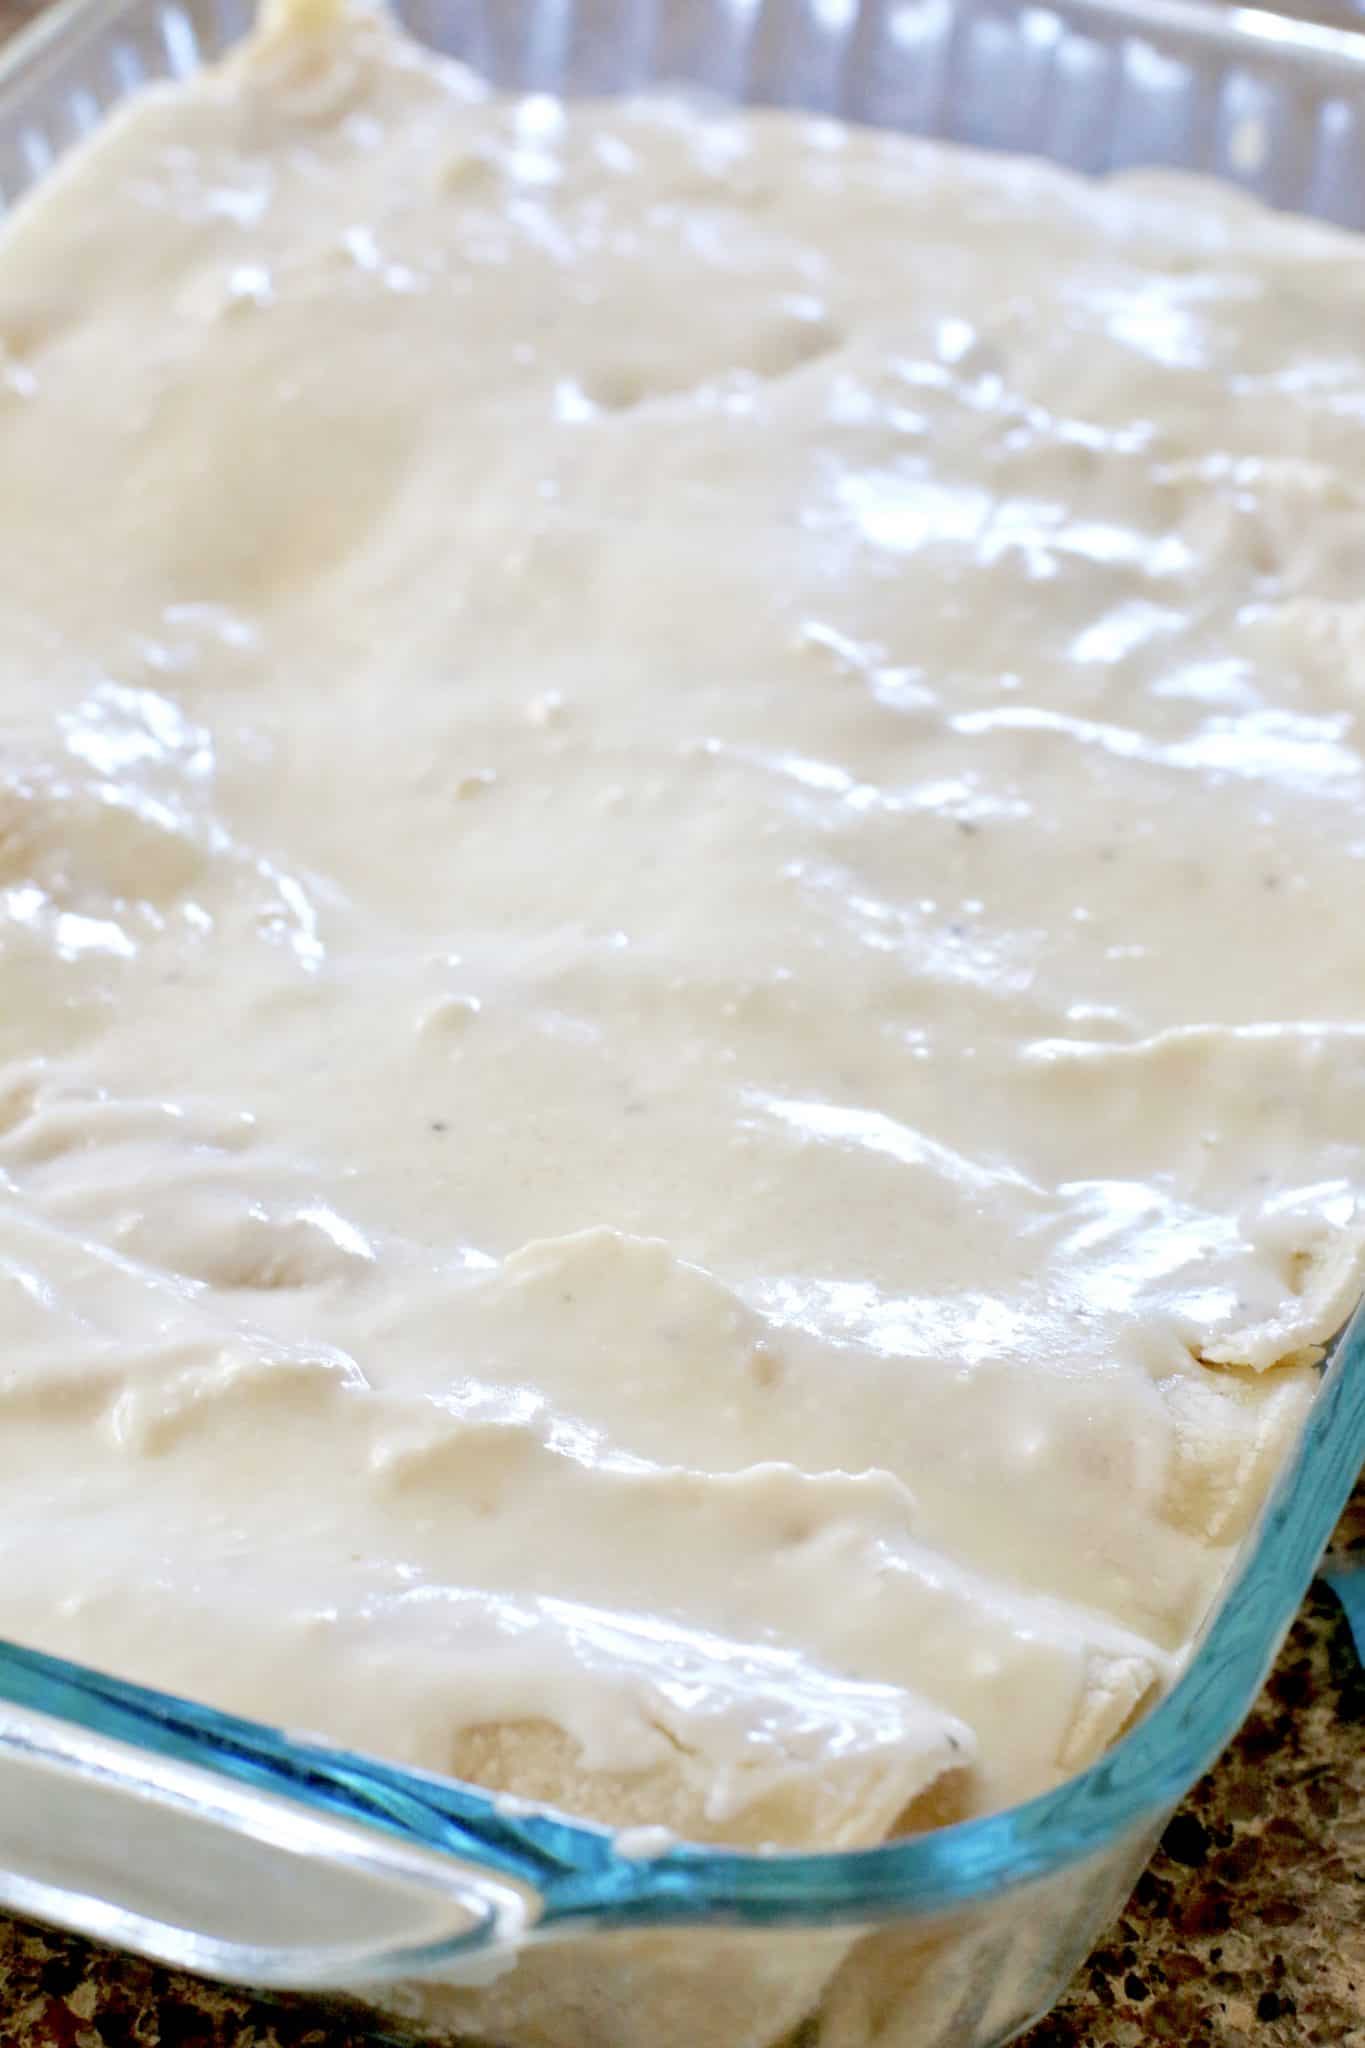 cream sauce mixture poured over rolled up tortillas. 